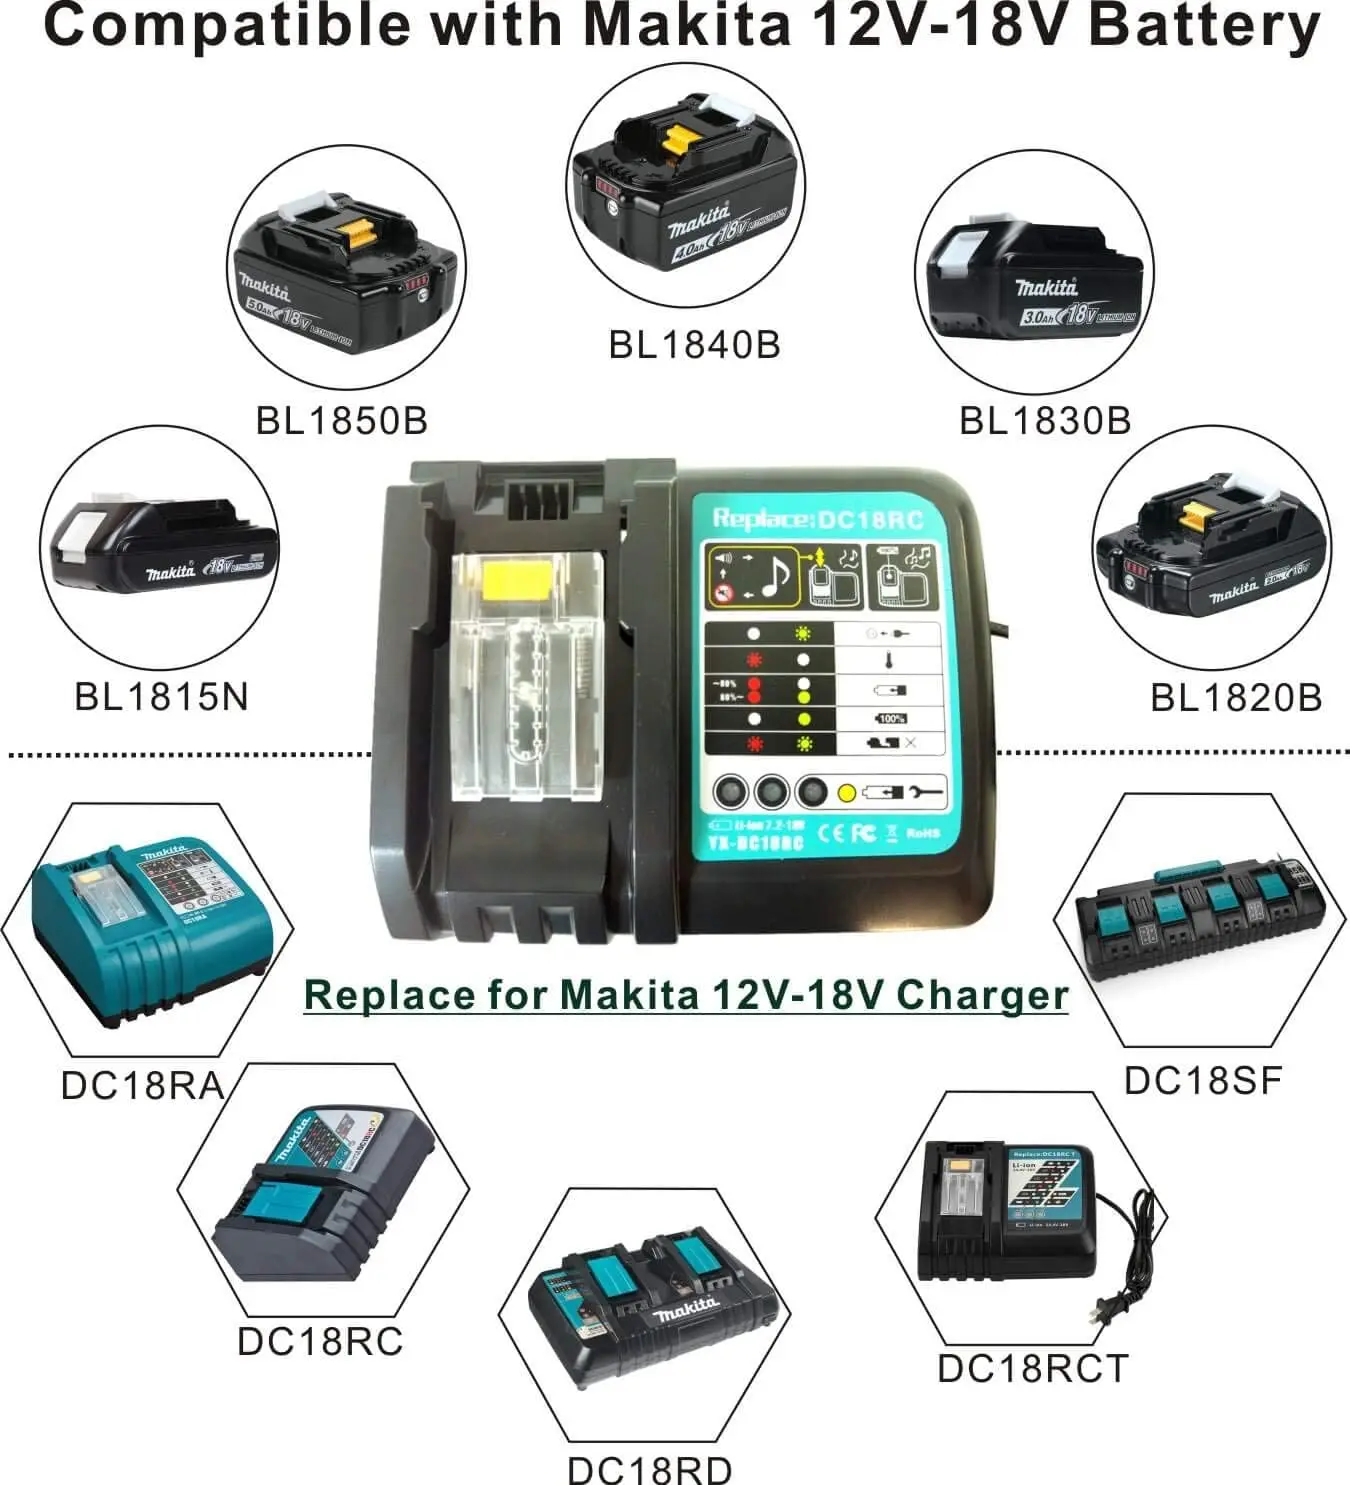 Details about   Charger Battery for Makita DC18RC BL1860 LI-ION LXT400 BL1830B Cordless Drill US 